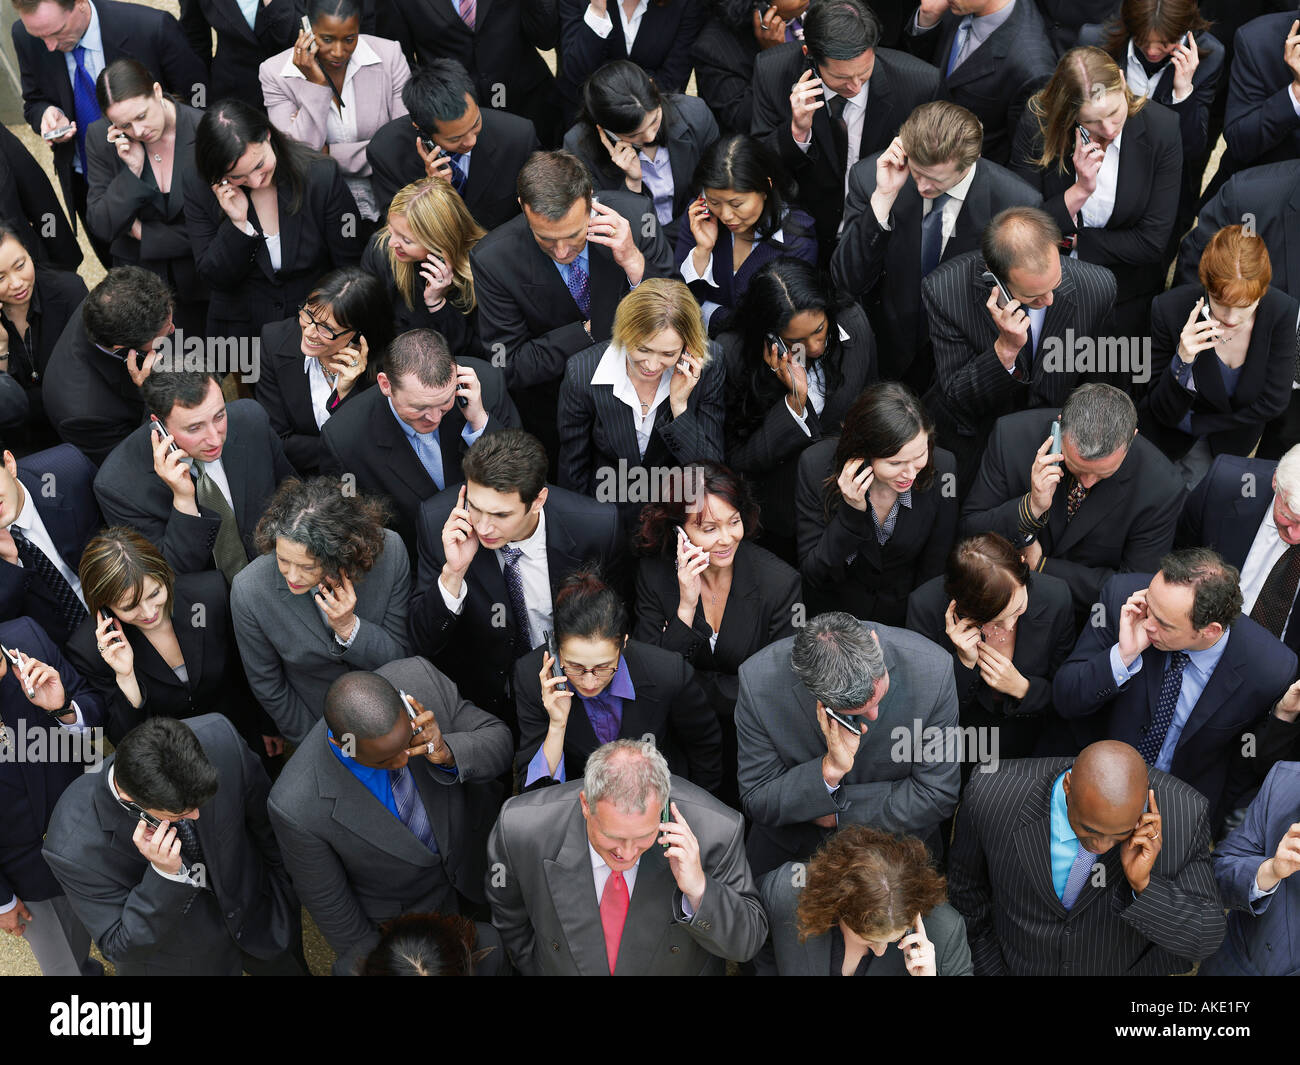 Large group of business people using mobile phones, elevated view Stock Photo